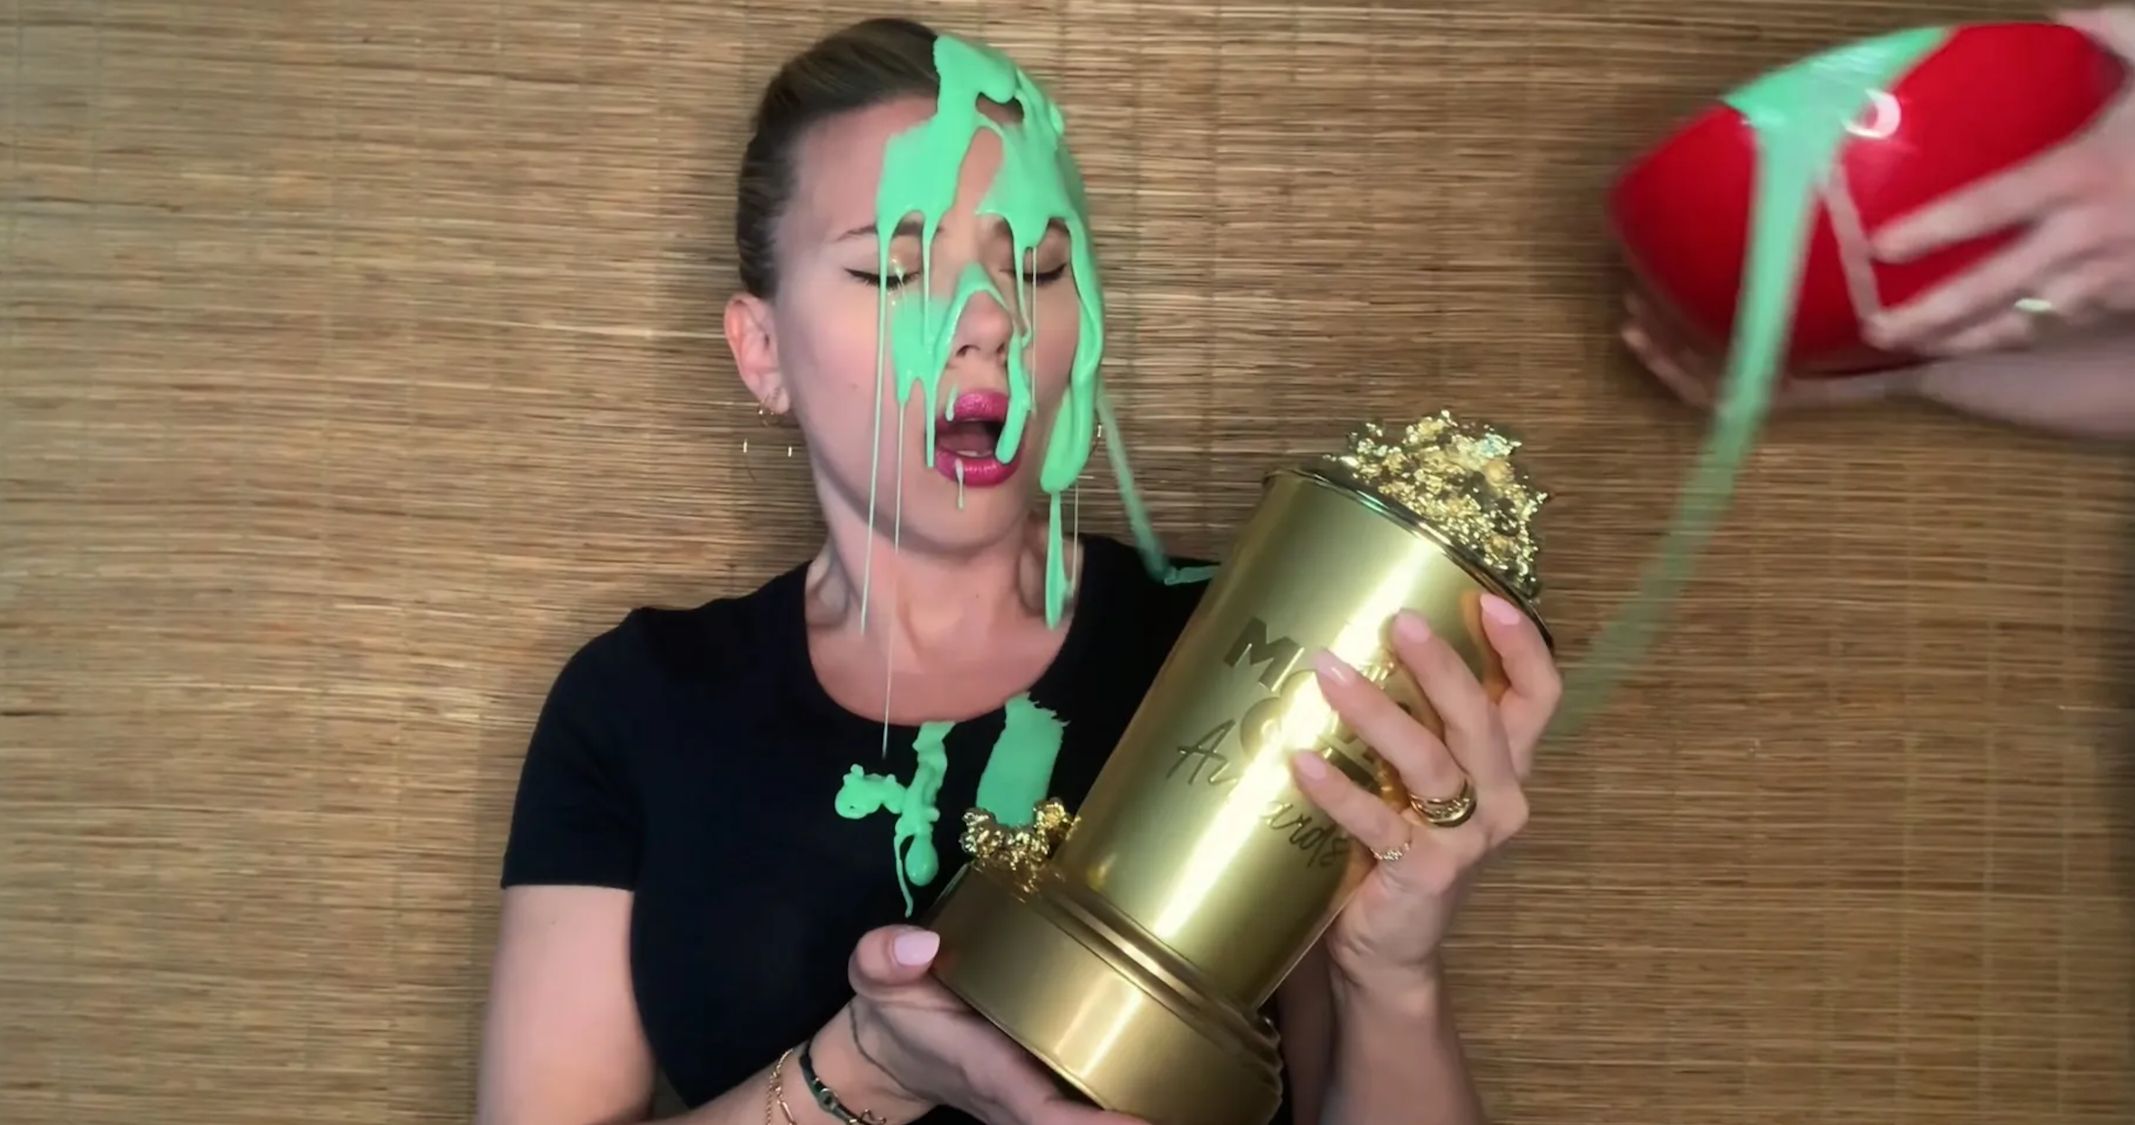 Watch Scarlett Johansson Get Slimed in MTV Movie and TV Awards Prank Pulled by Colin Jost